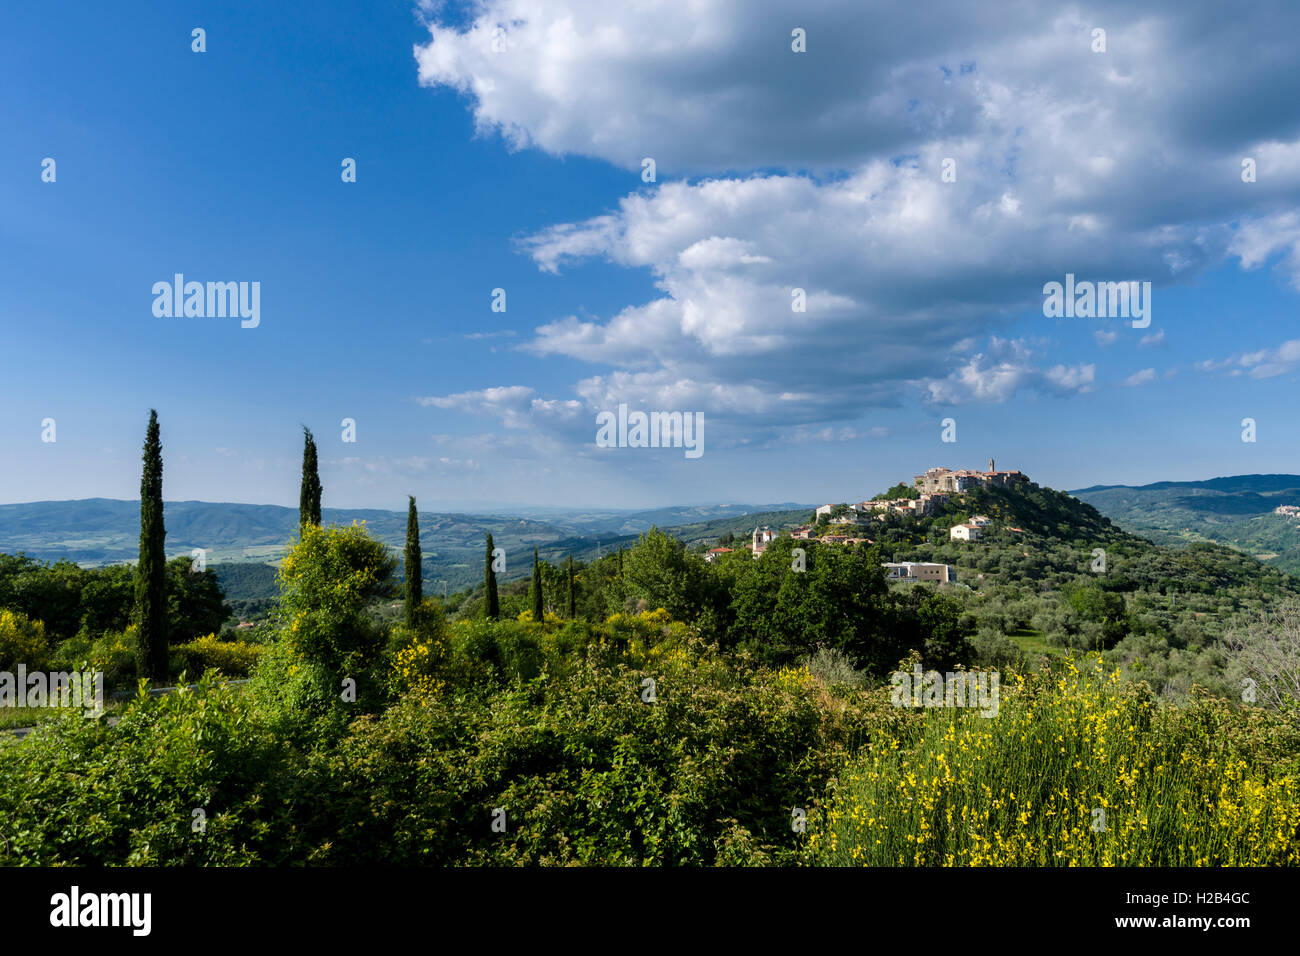 Typical Tuscany landscape with hills and cypresses, in the back a town on a hill, Montegiovi, Tuscany, Italy Stock Photo